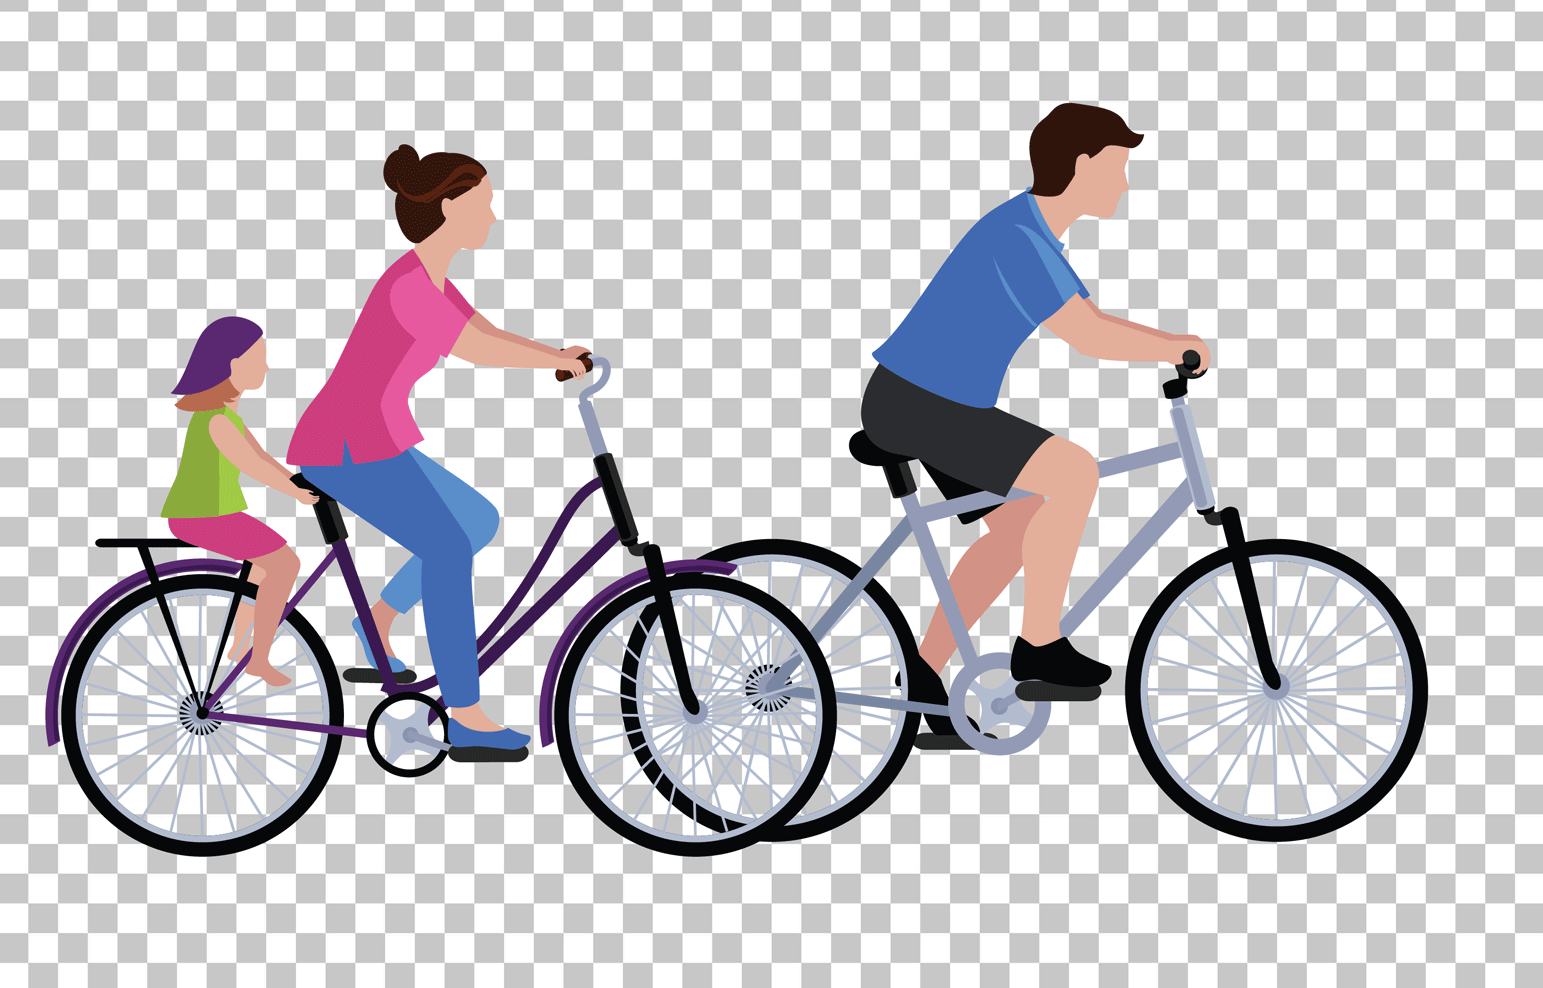 A family of three riding their bicycles together.